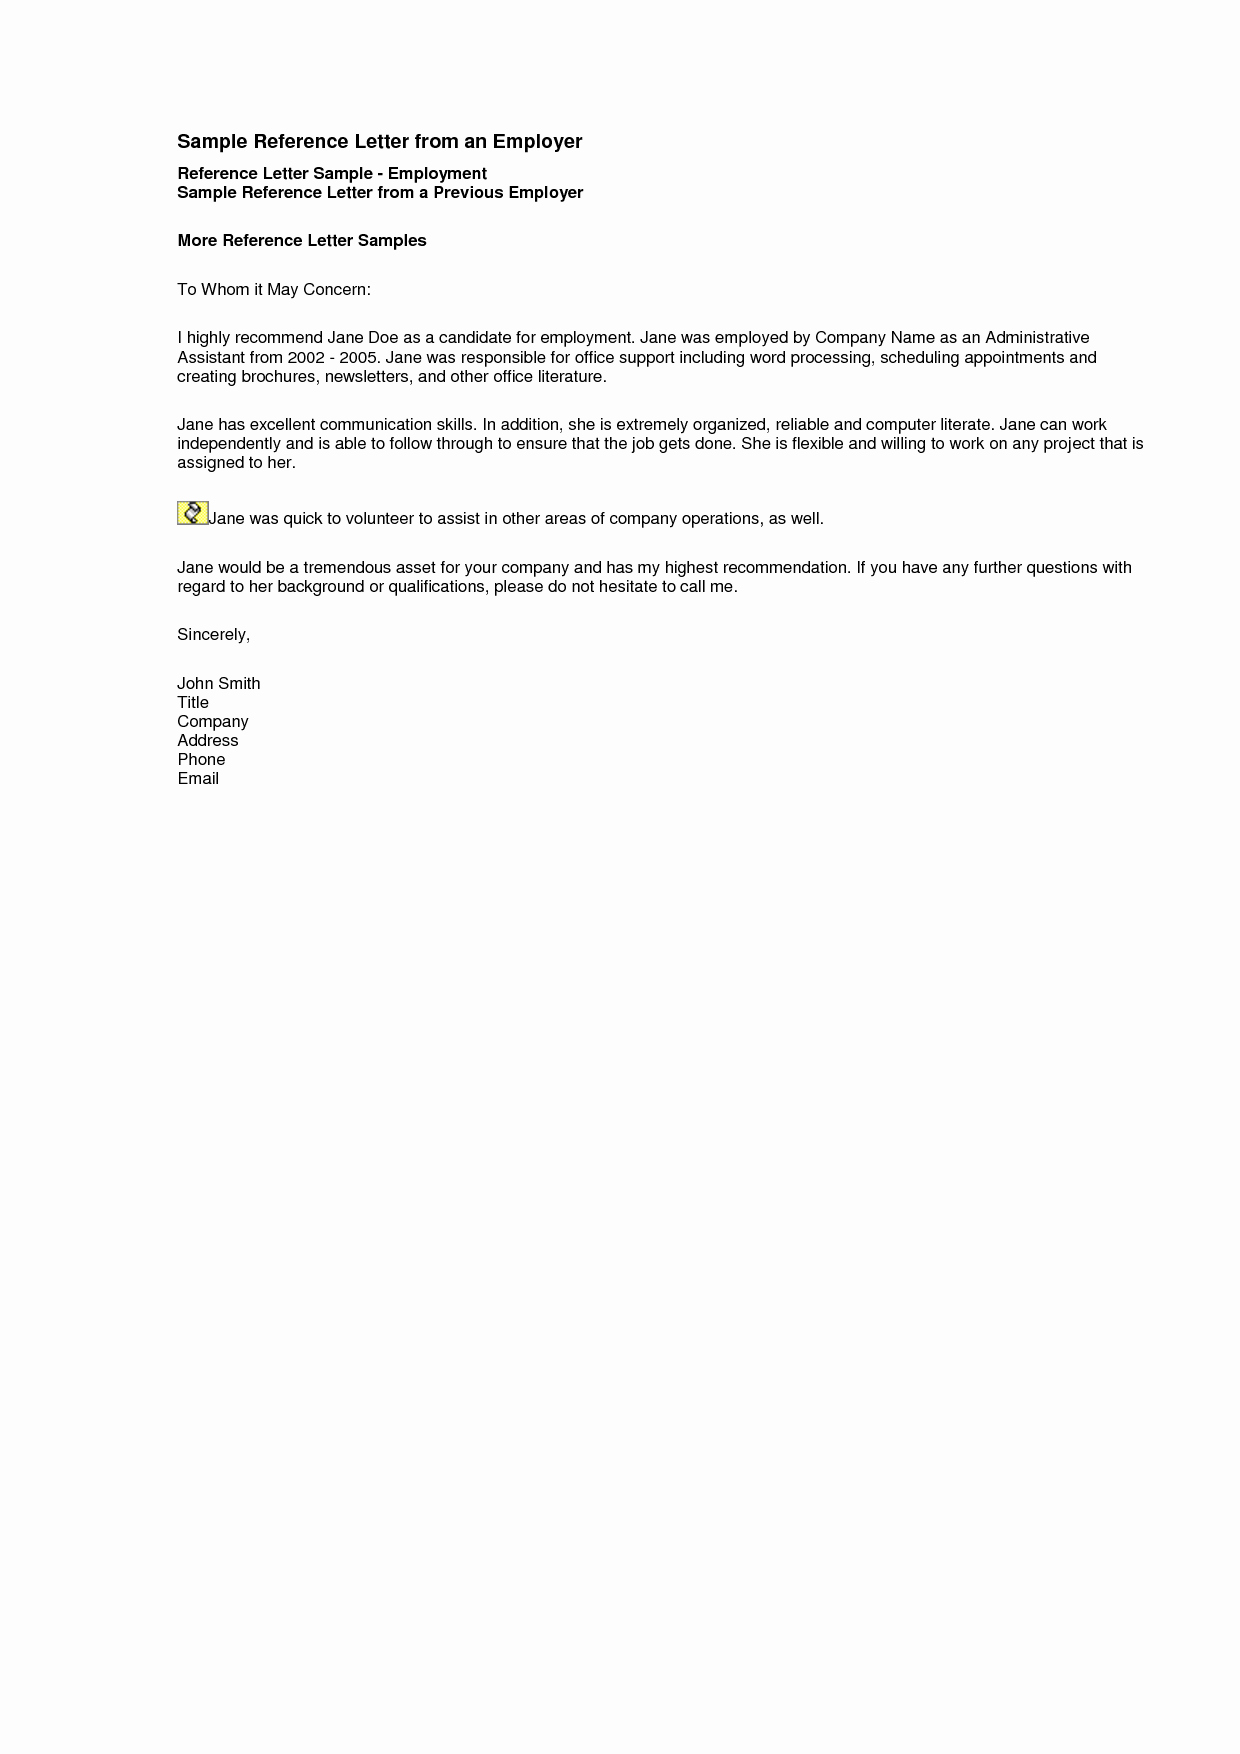 Sample Of Employment Reference Letter New Sample Reference Letter for Employment